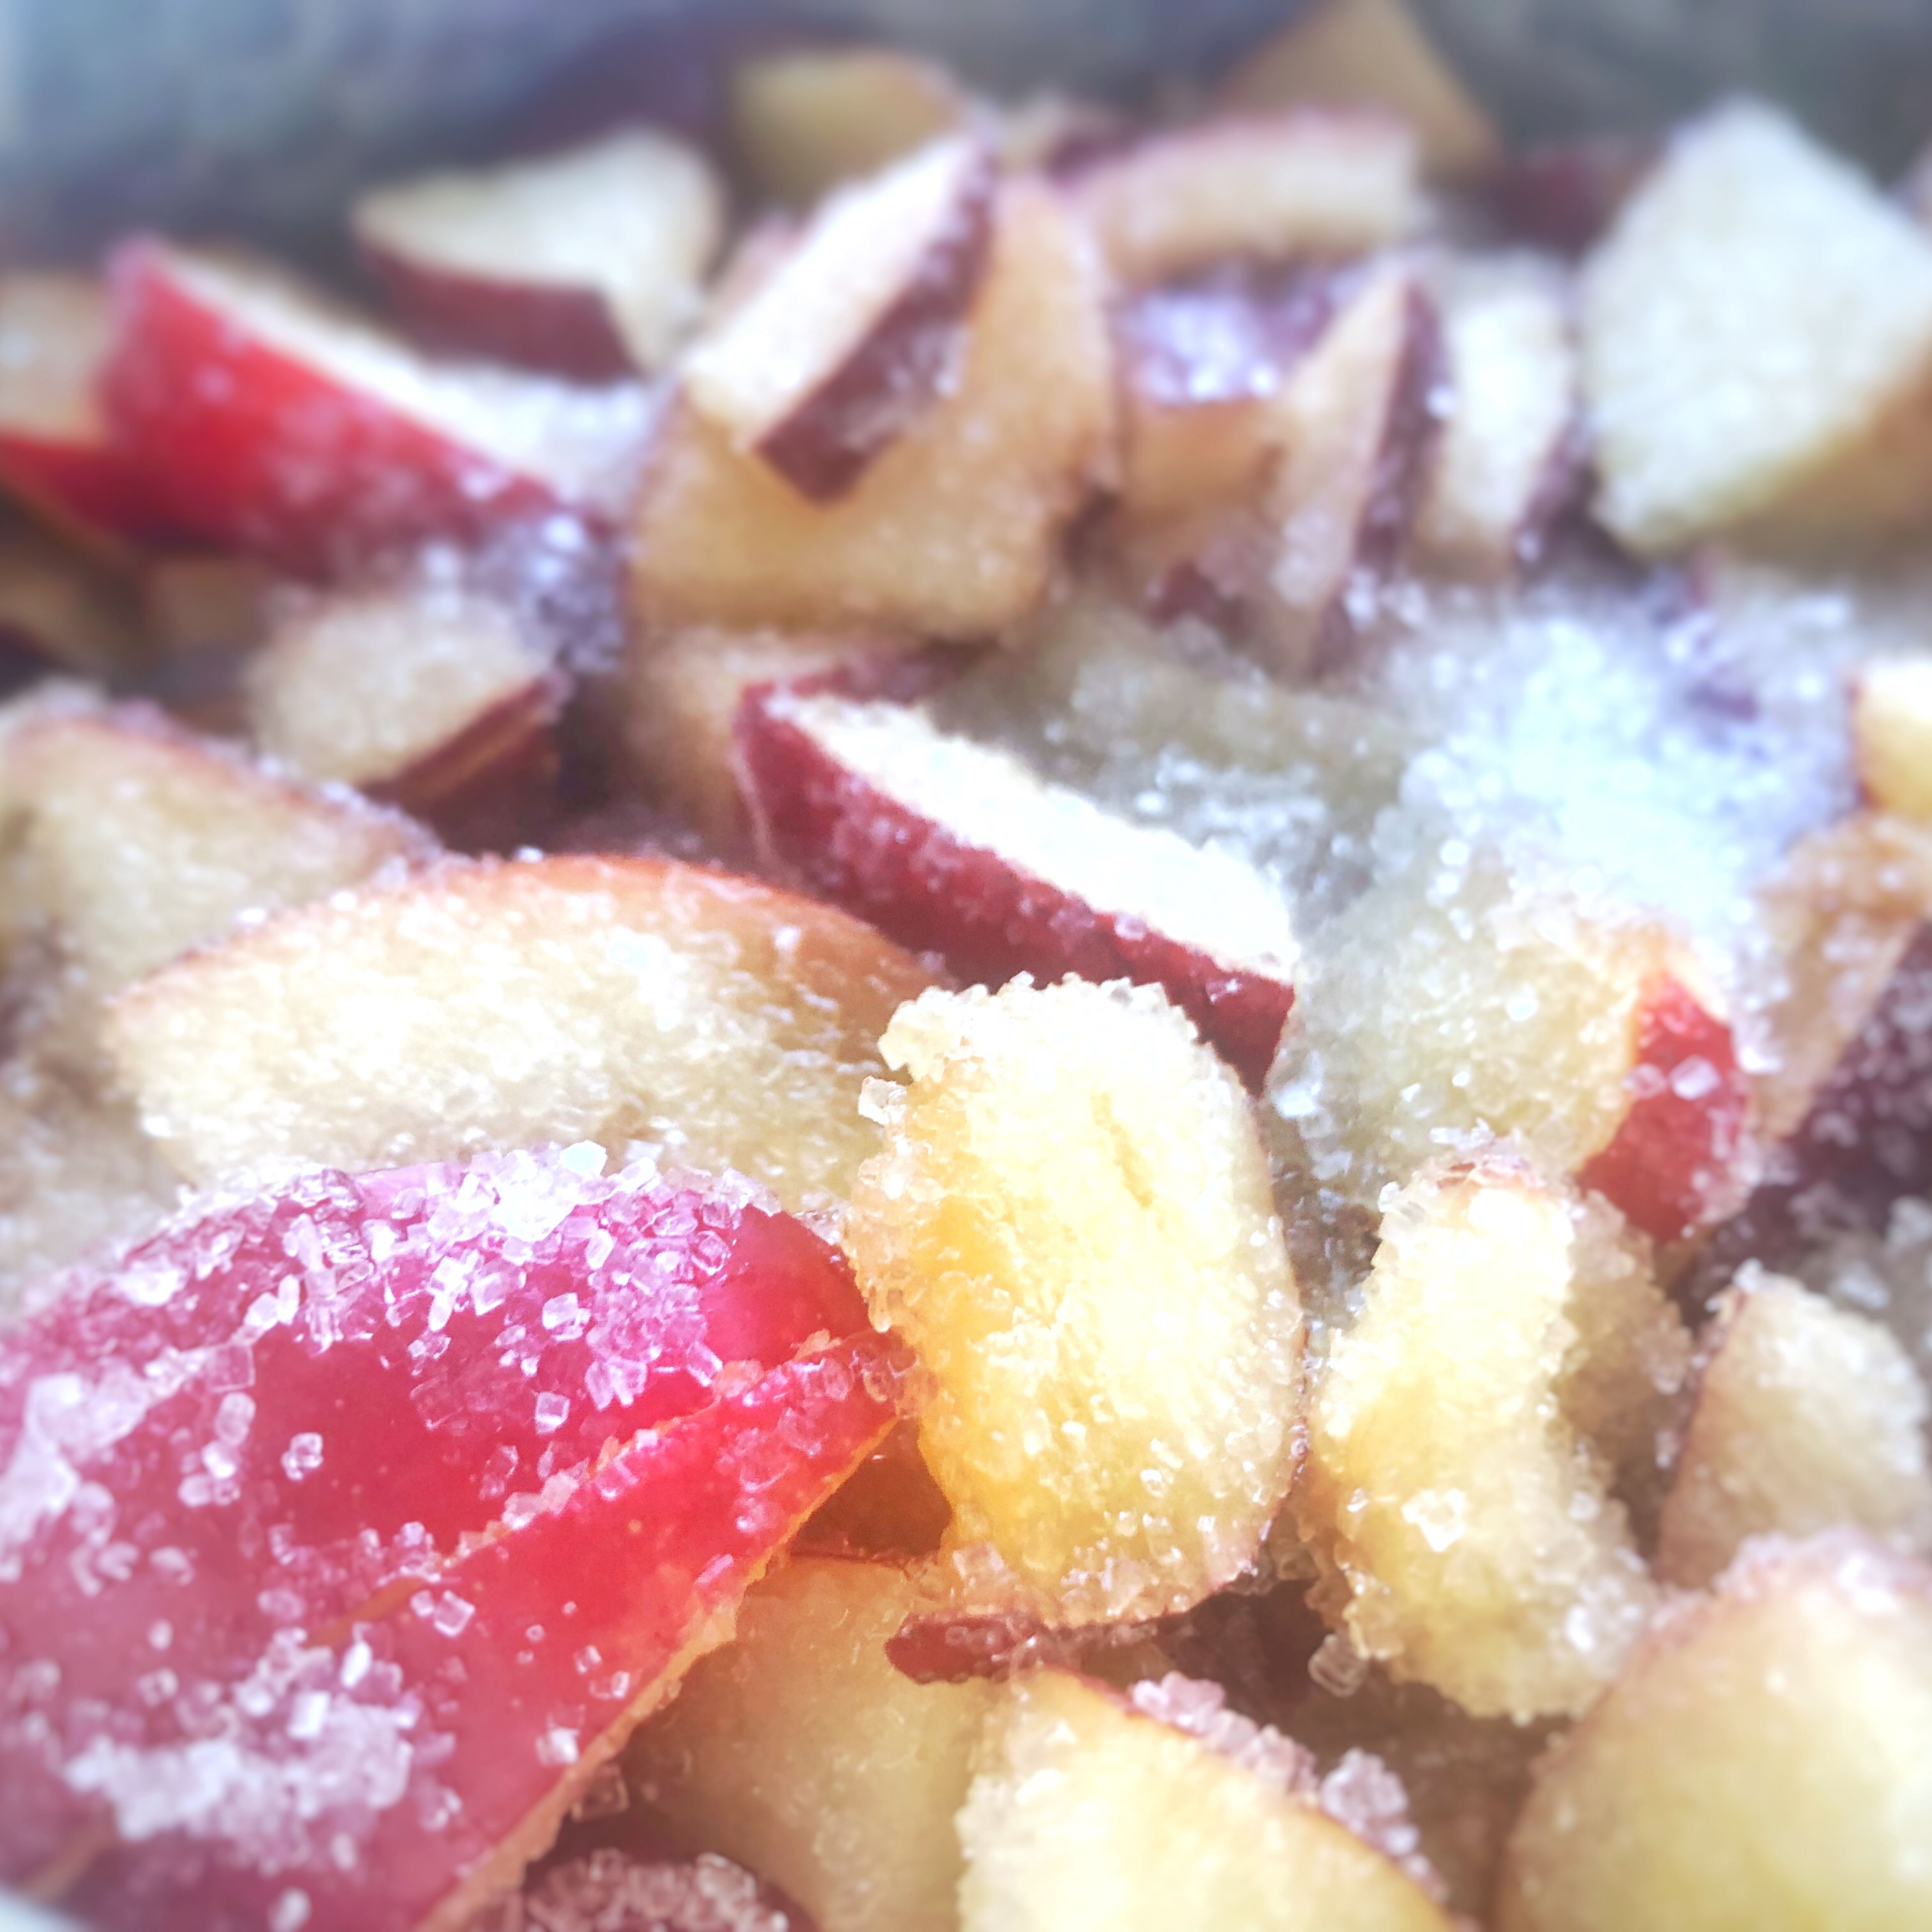 Pour all honey and sugar evenly over the plums and pickle the plums for about 30 minutes.